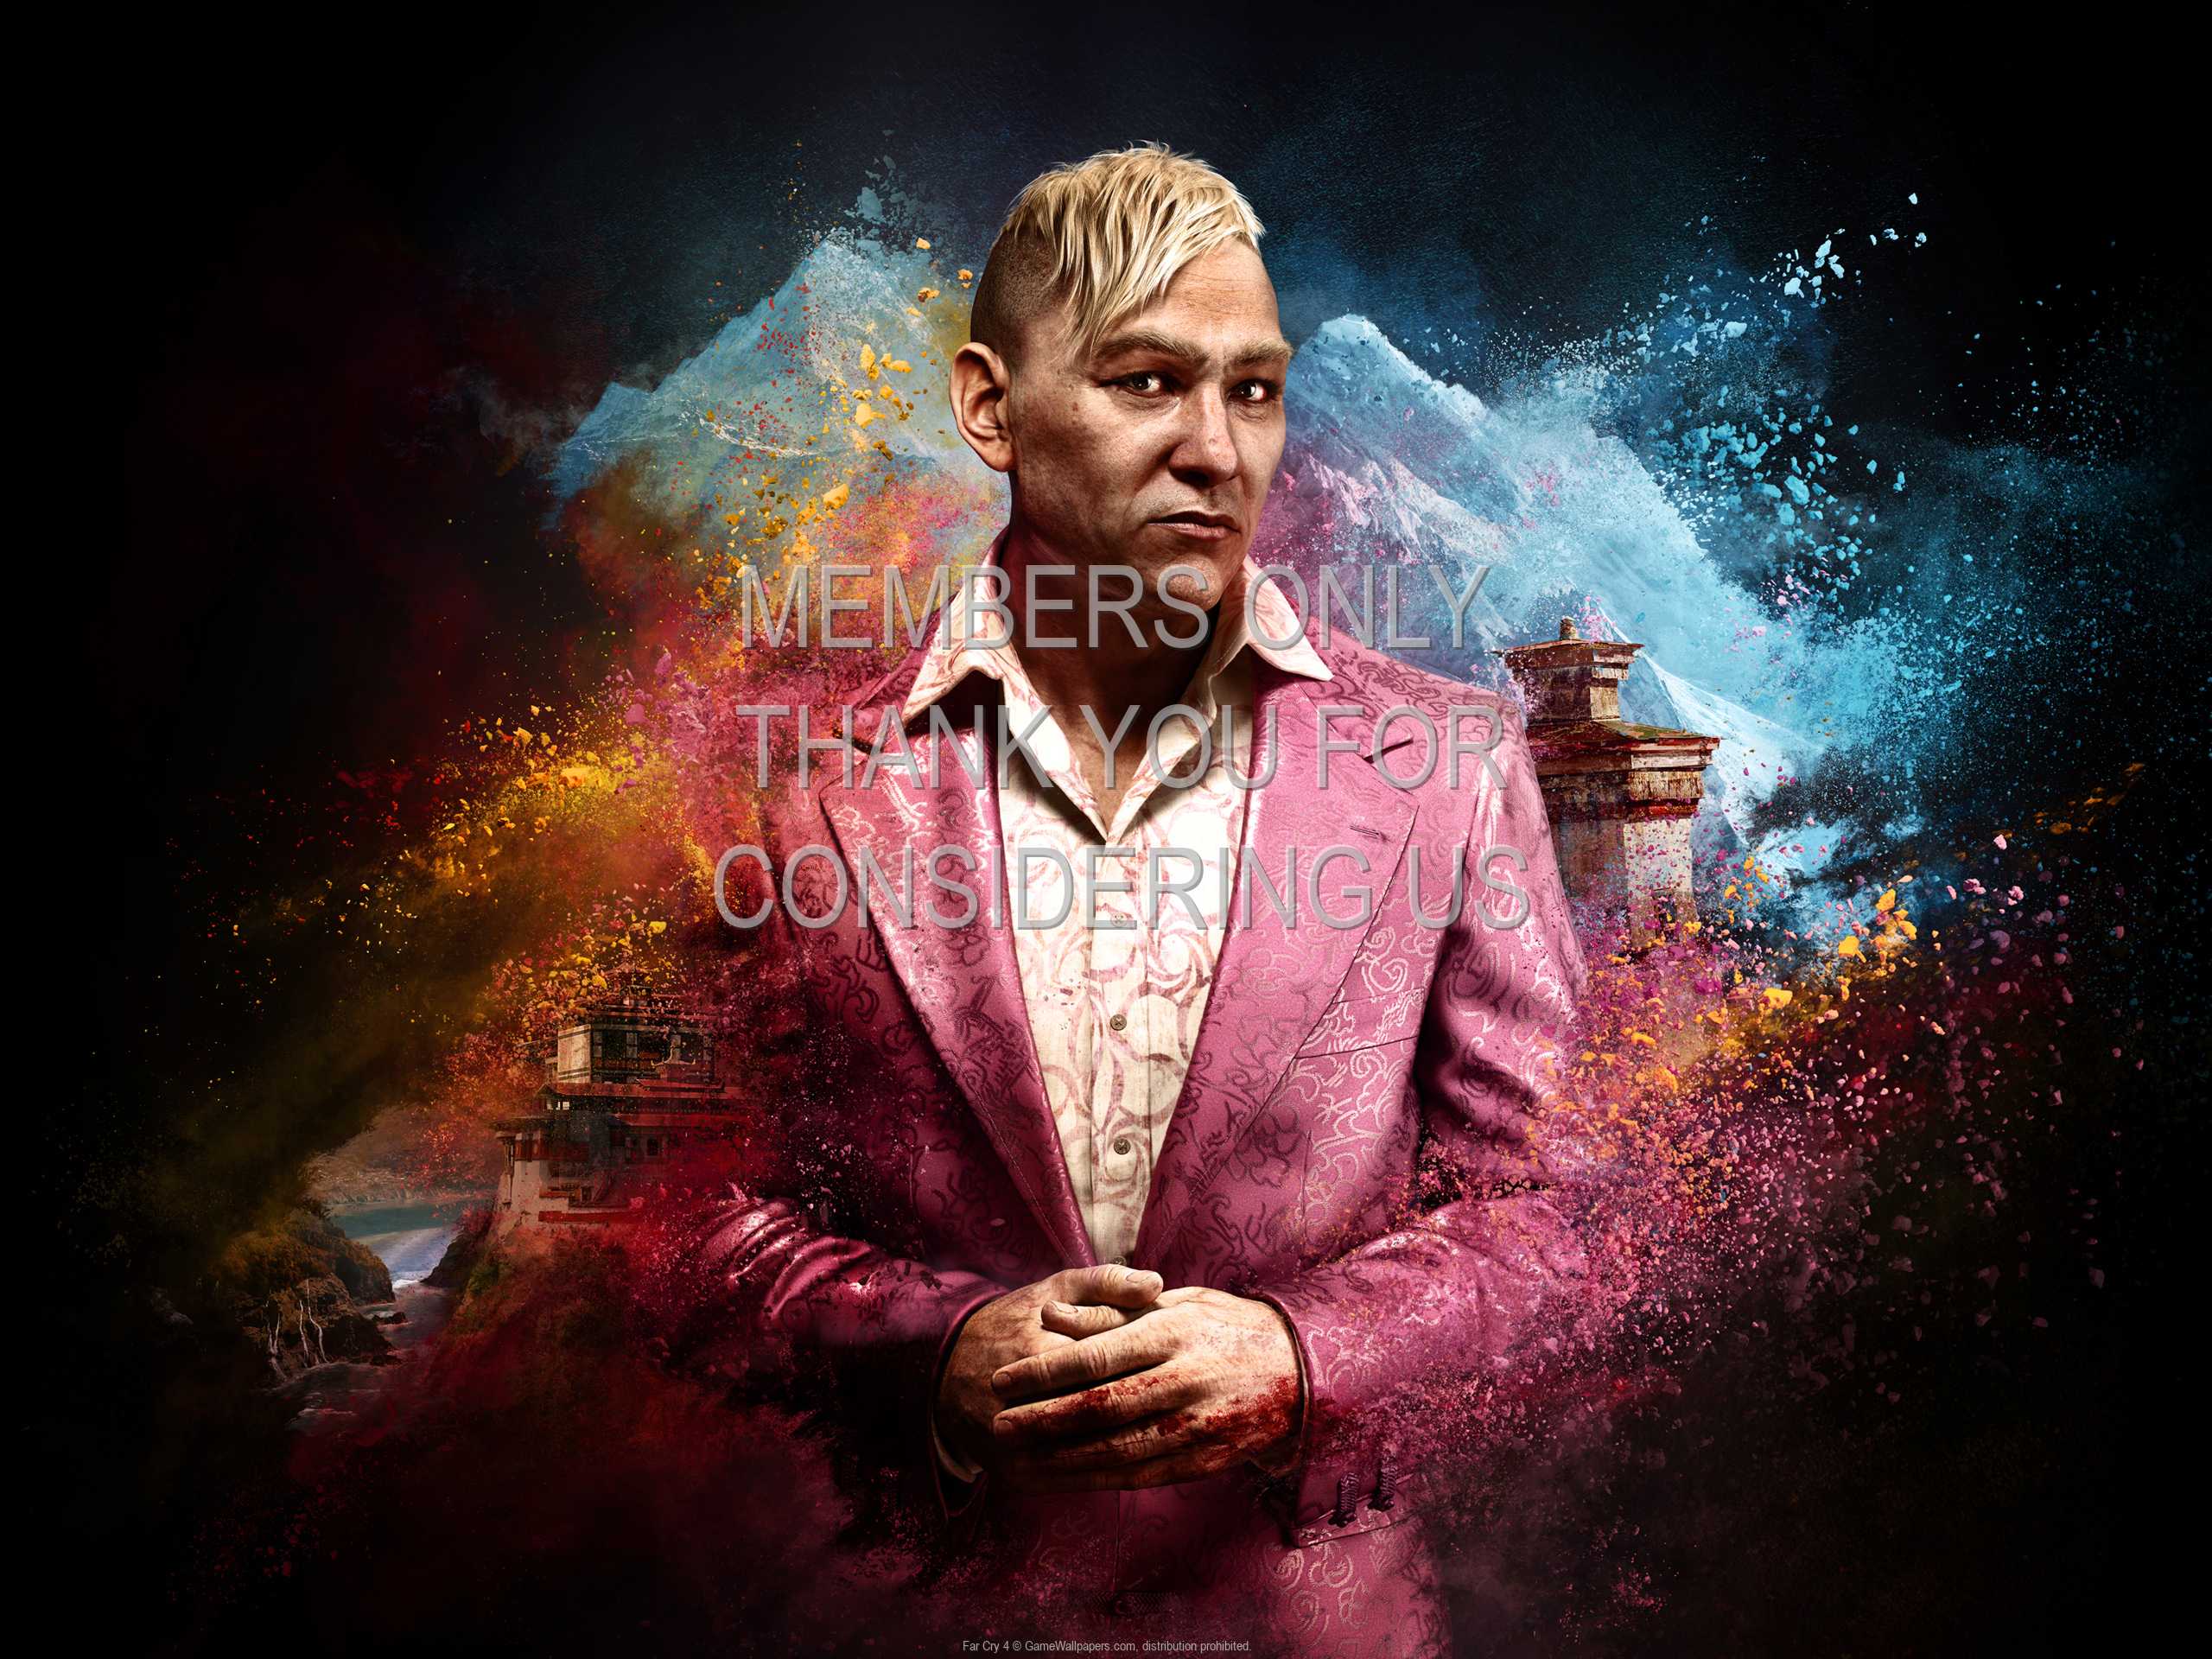 Far Cry 4 1080p%20Horizontal Mobile wallpaper or background 02